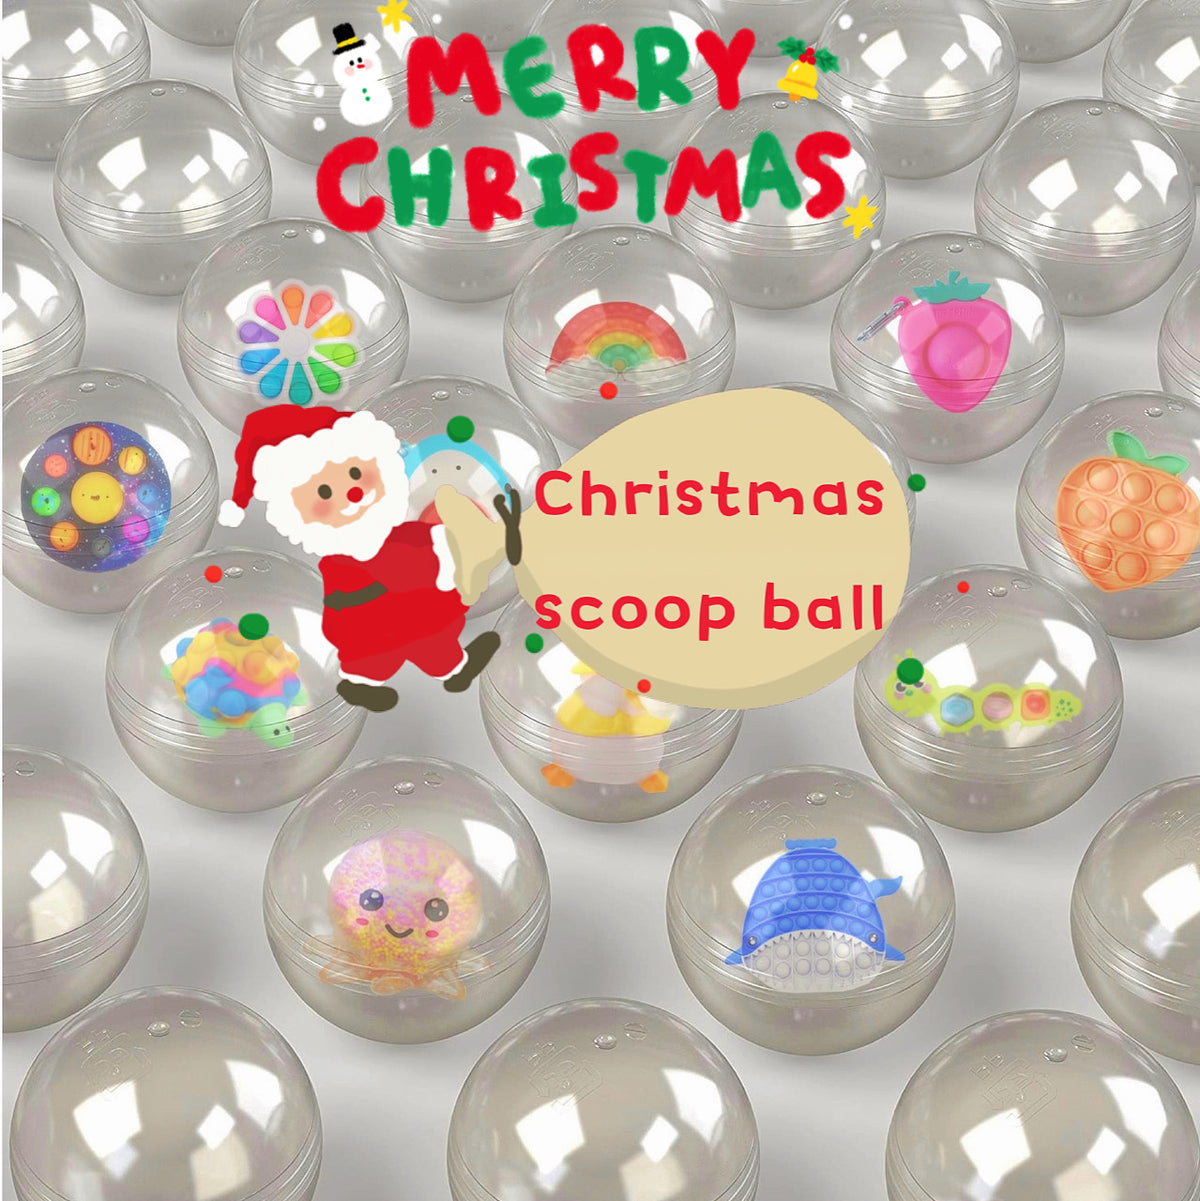 Limited Edition Christmas Lucky Scoop Ball